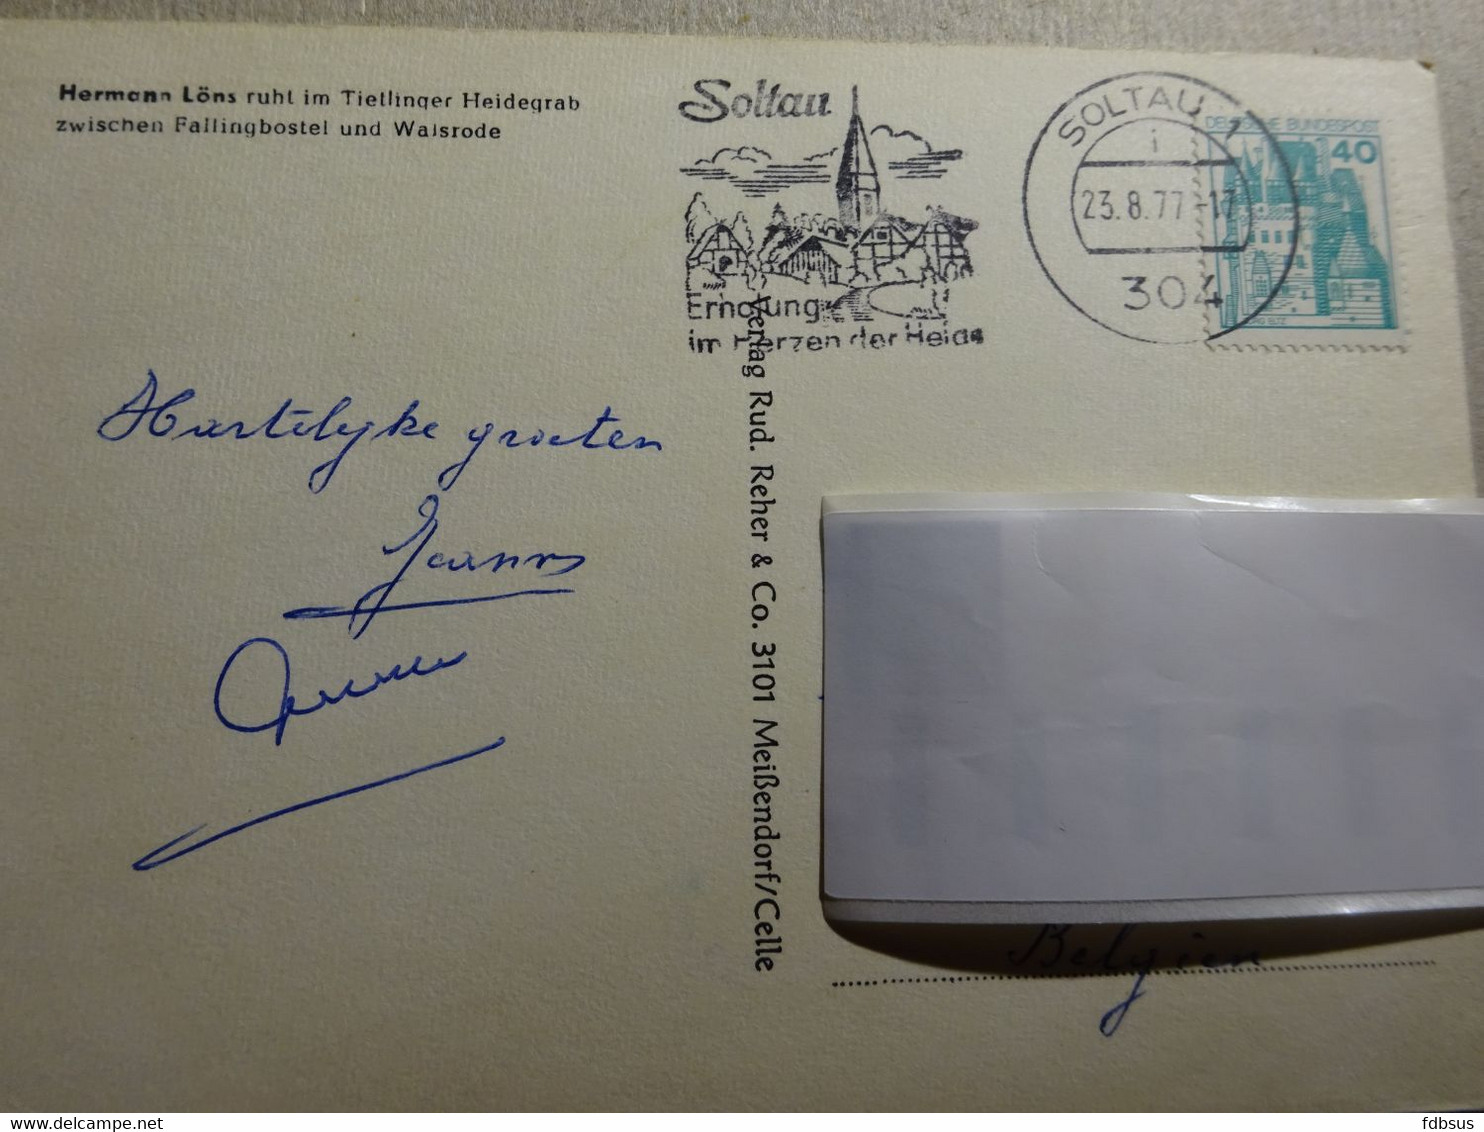 1977 Soltau Hermann Lons Walsrode Heidegraf - Card To Belgium - Tietlingen - See Scans For Stamps And Eventually Slogan - Walsrode